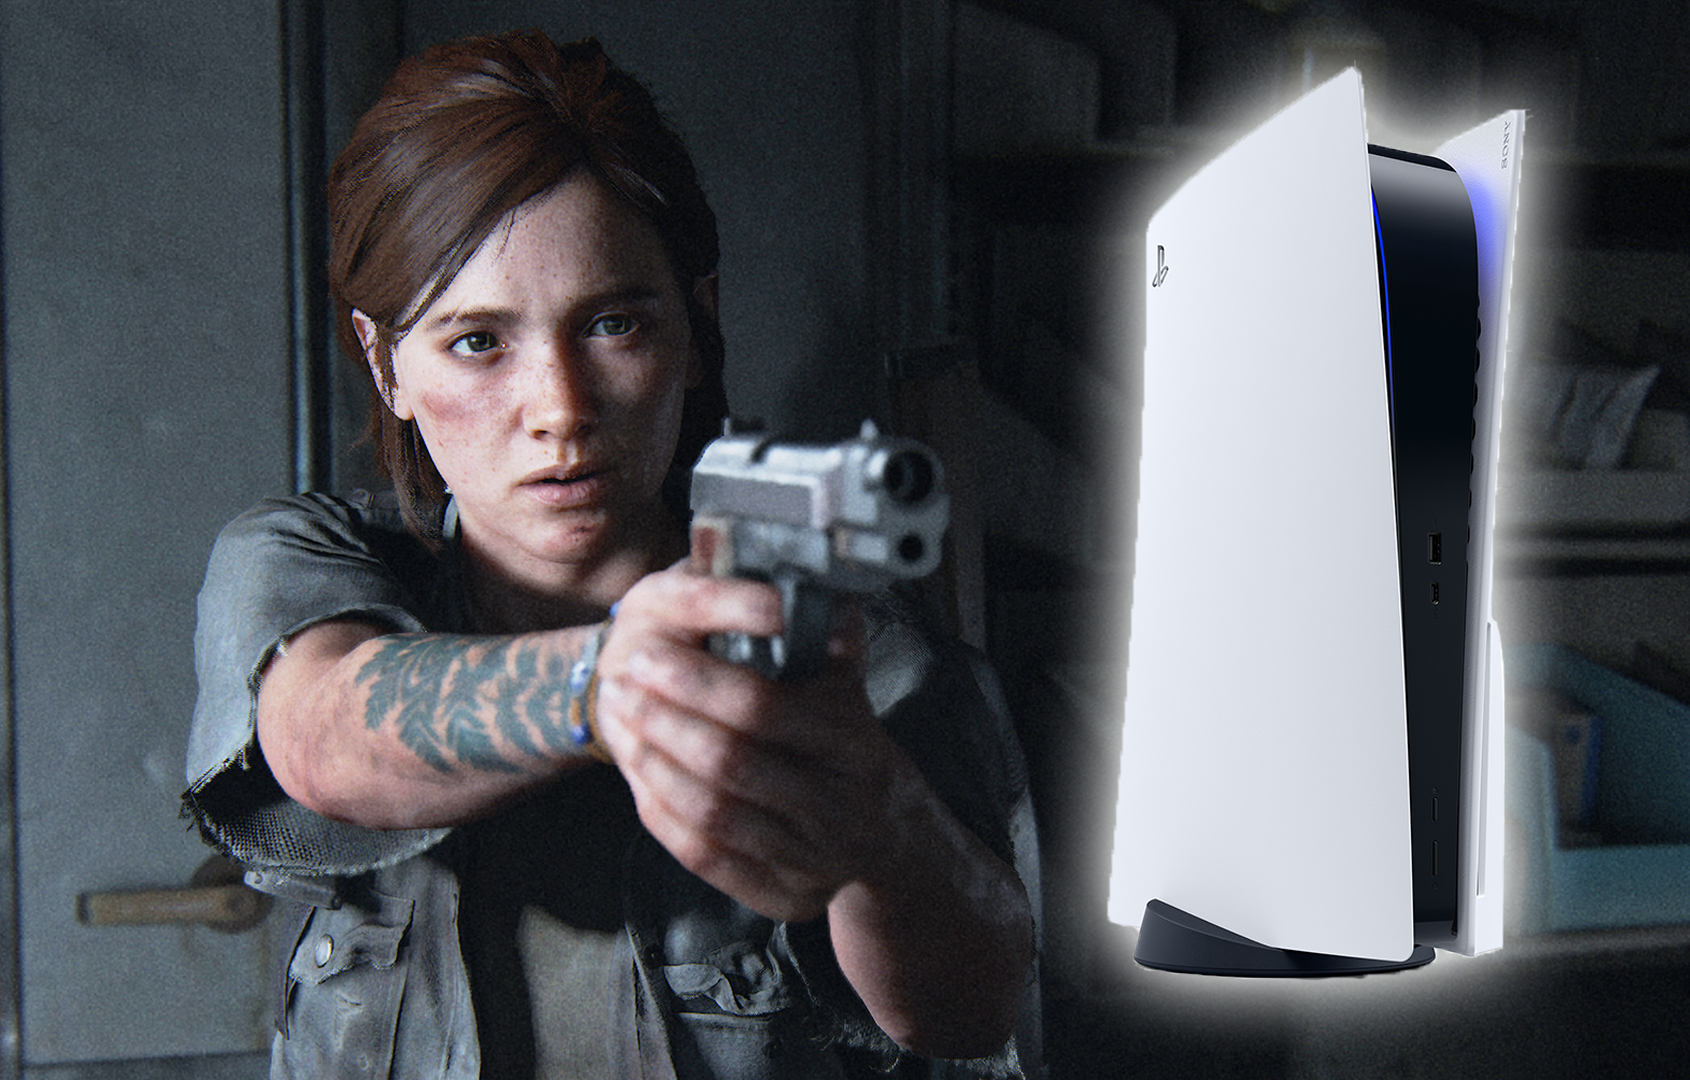 download the last of us remastered ps5 for free